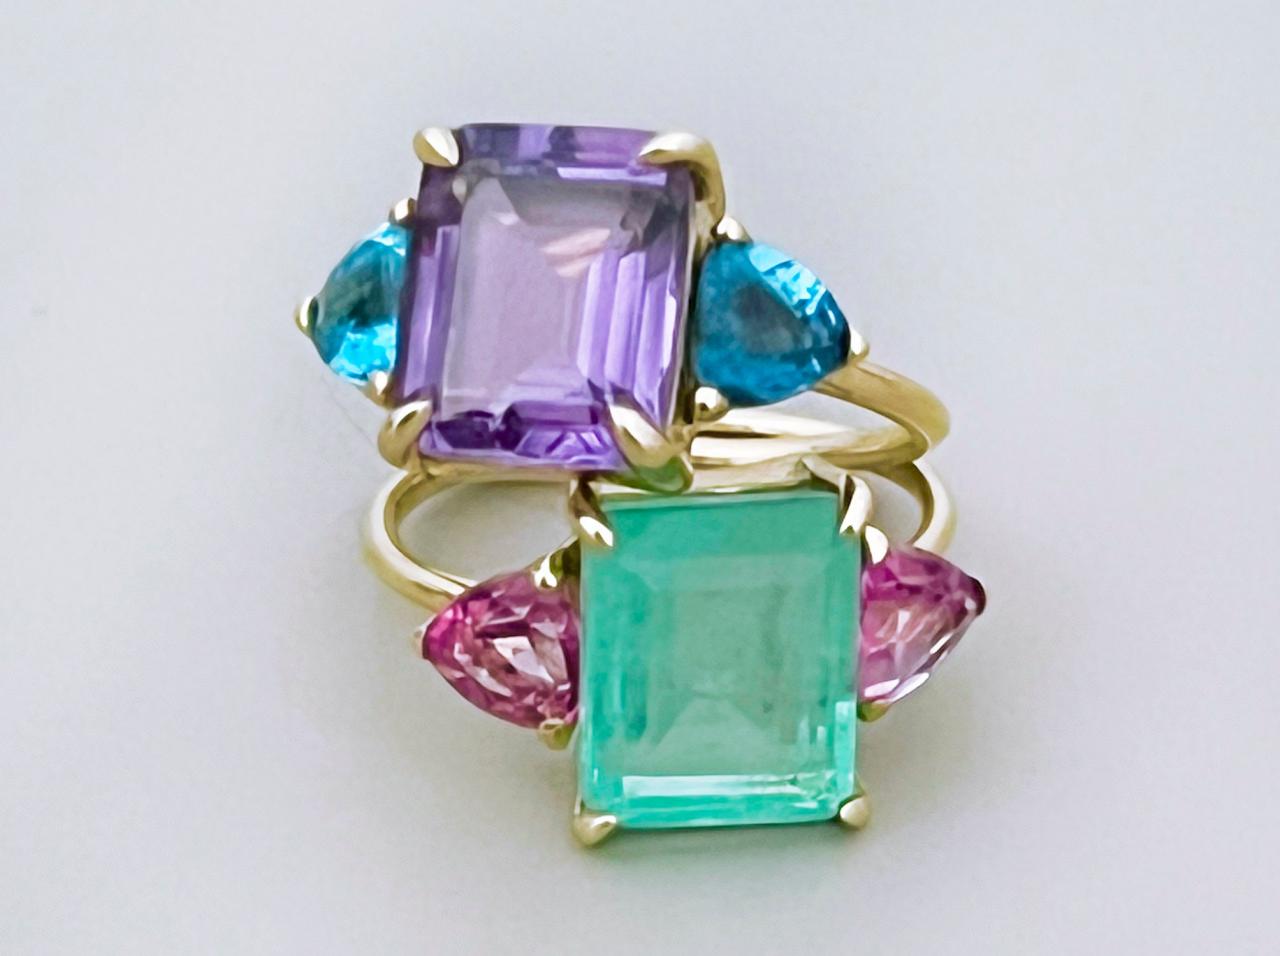 Solid Gold Emerald Cut Statement Ring, 9k/18k Delicate Promise Ring With Gemstones, 3 Natural Stone Engagement Ring.